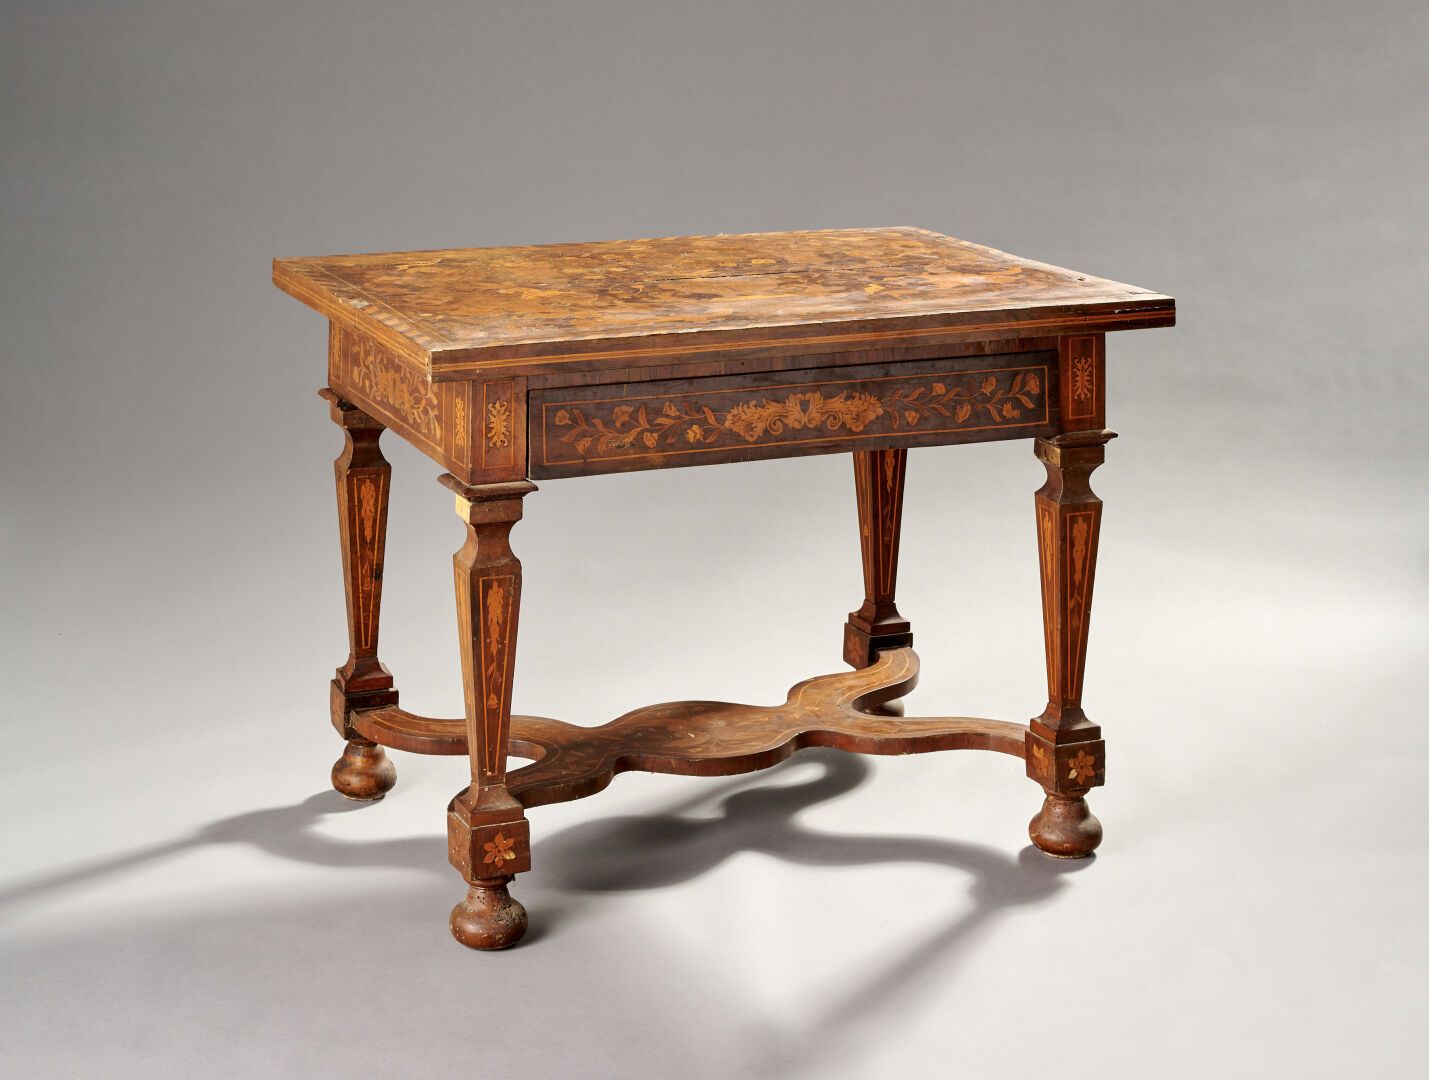 Null Writing table with rectangular top in rosewood veneer inlaid with floral sc&hellip;